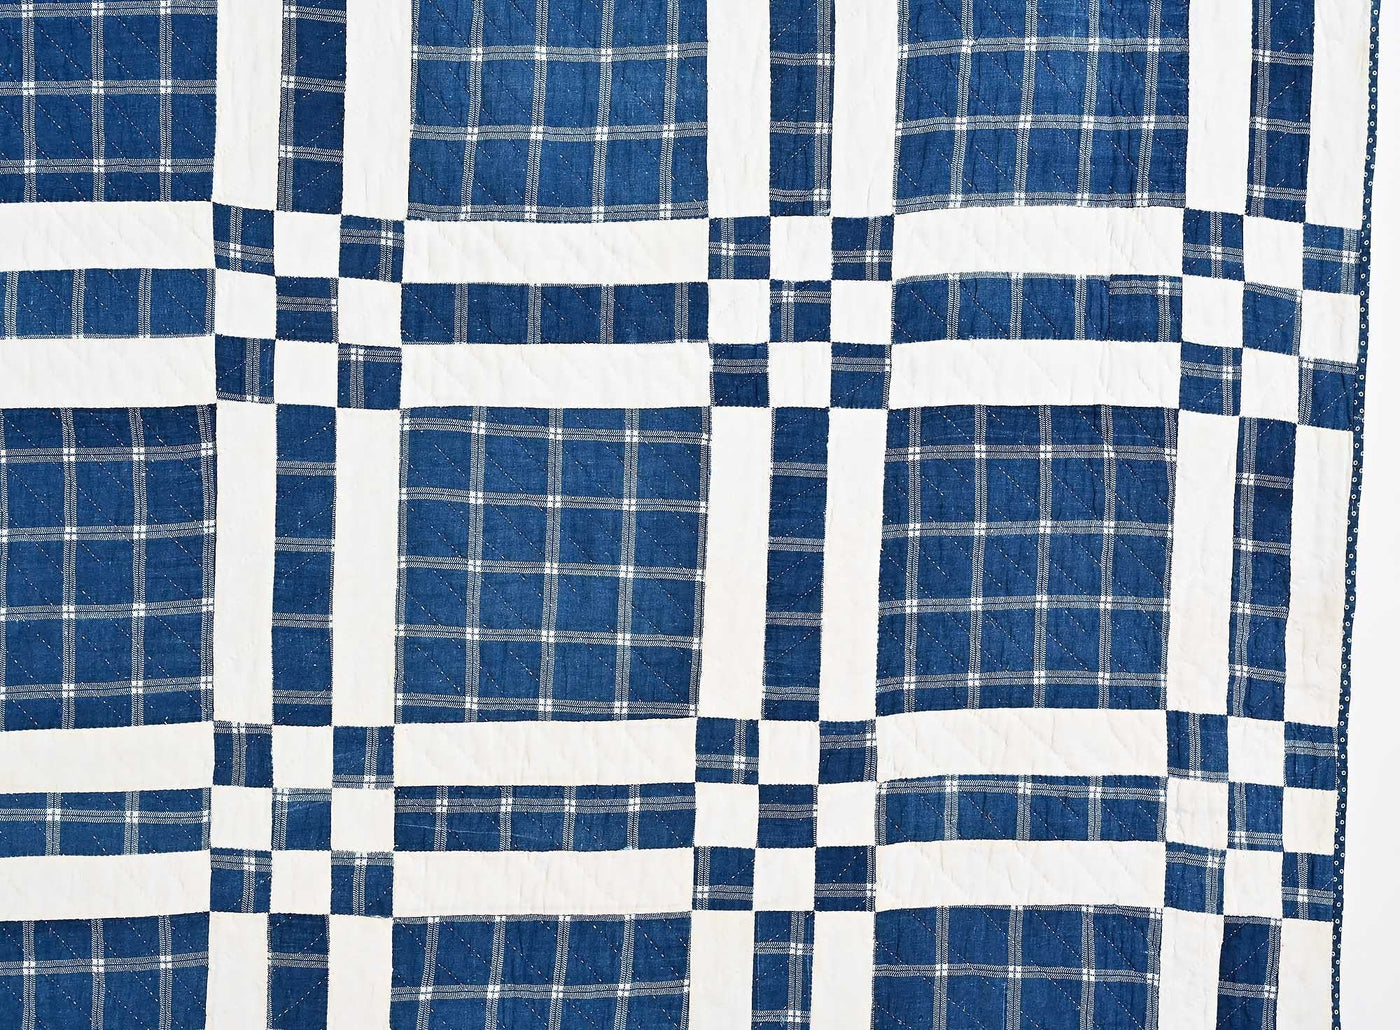 early-windowpane-nine-patch-quilt-1452020-right-border-detail-3